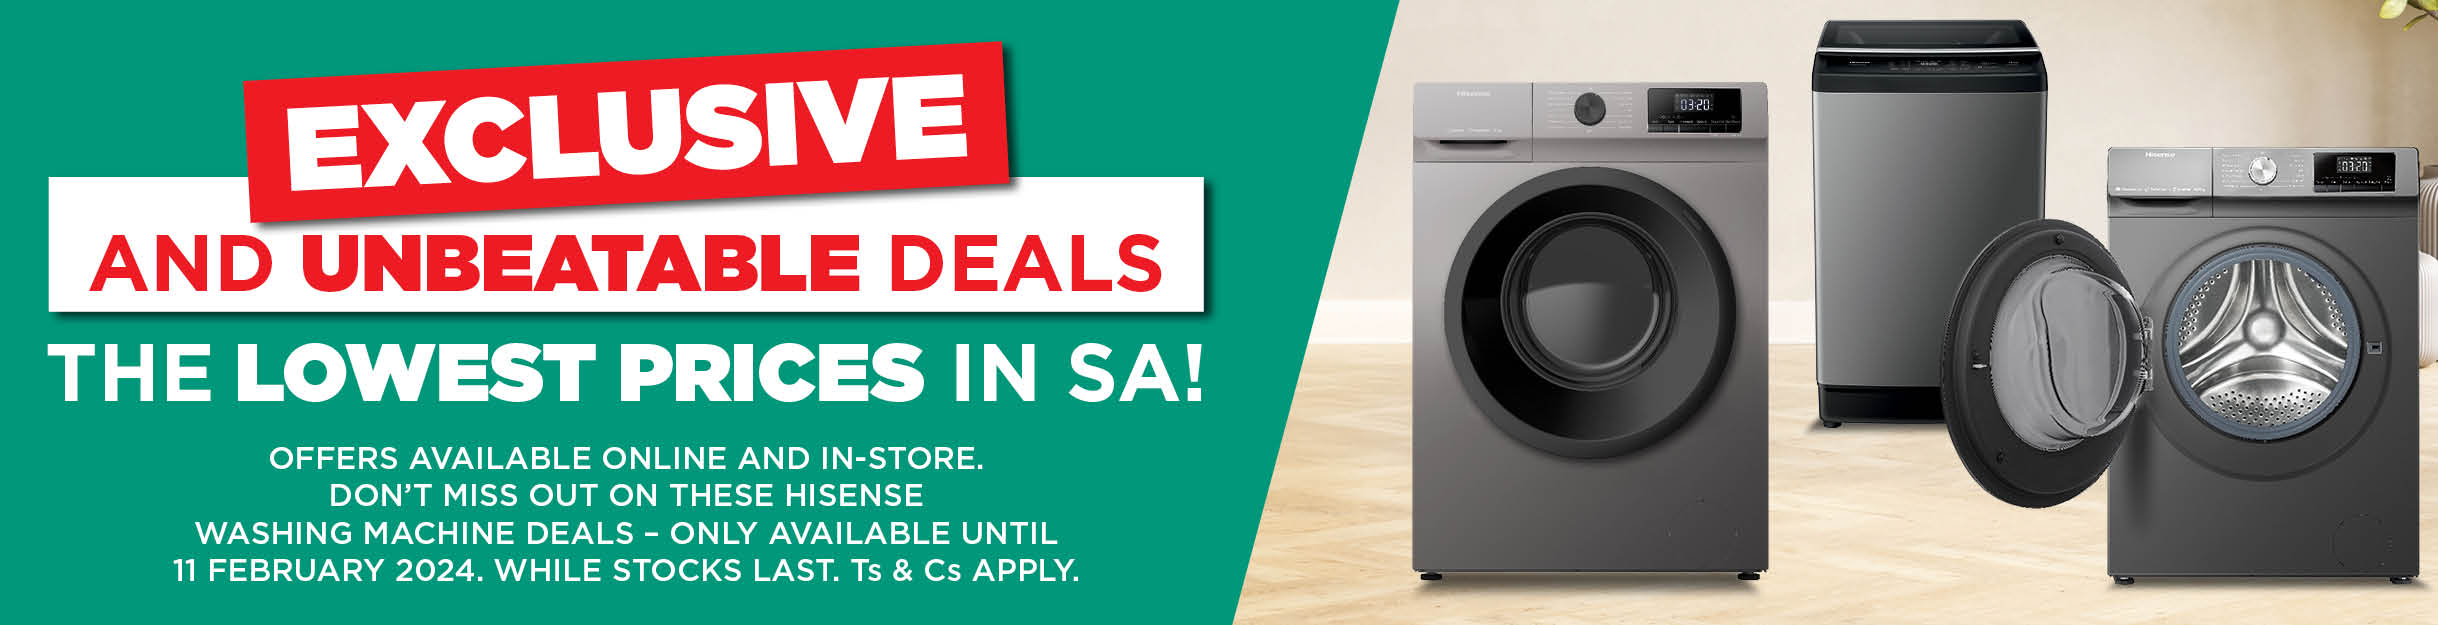 EXCLUSIVE AND UNBEATABLE HISENSE DEALS THE LOWEST PRICES IN SA!